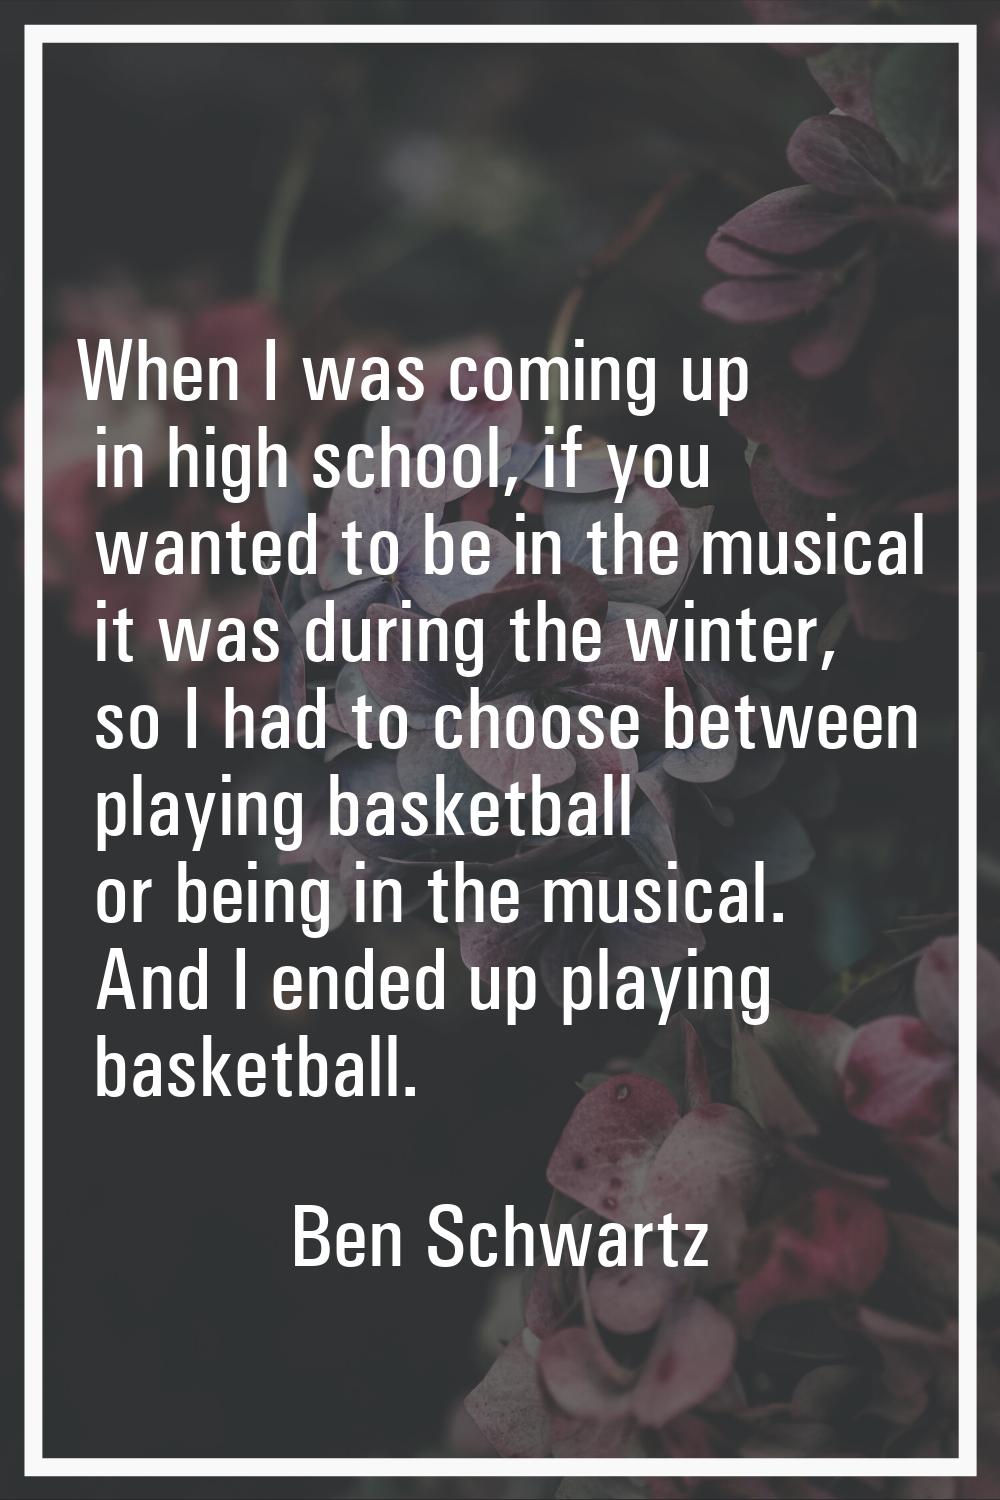 When I was coming up in high school, if you wanted to be in the musical it was during the winter, s